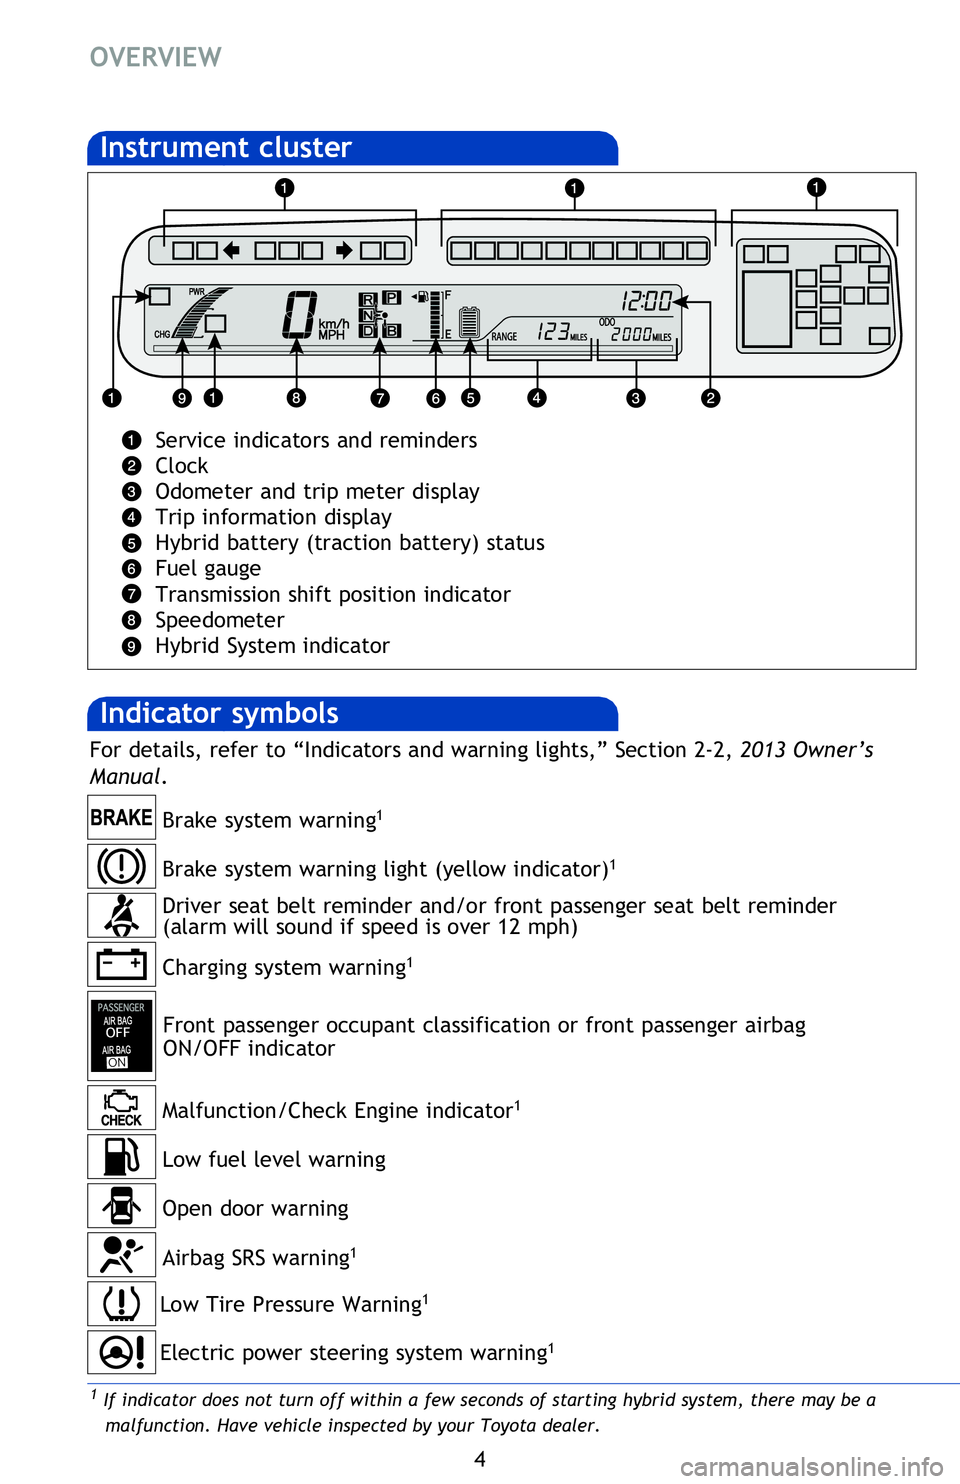 TOYOTA PRIUS V 2013  Owners Manual (in English) 4
OVERVIEW
Indicator symbols 
Instrument cluster
Service indicators and reminders  
Clock
Odometer and trip meter display
Trip information display
Hybrid battery (traction battery) status
Fuel gauge
T